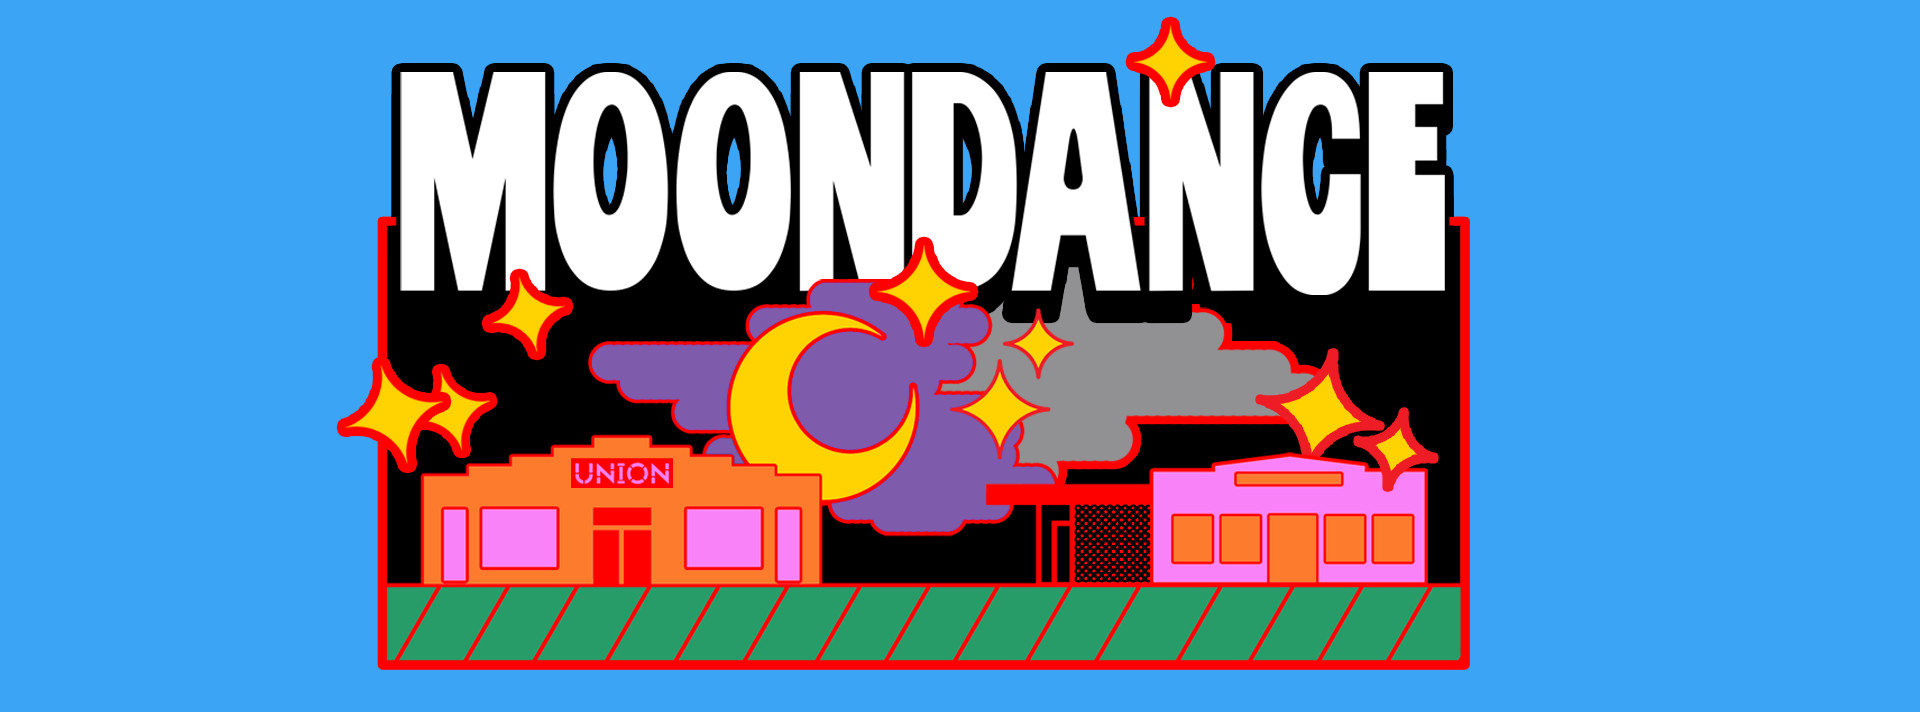 The 2024 Moondance Logo feautring a colorful rendering of The Union and Shirley Tyree Theater with a moon and stars above